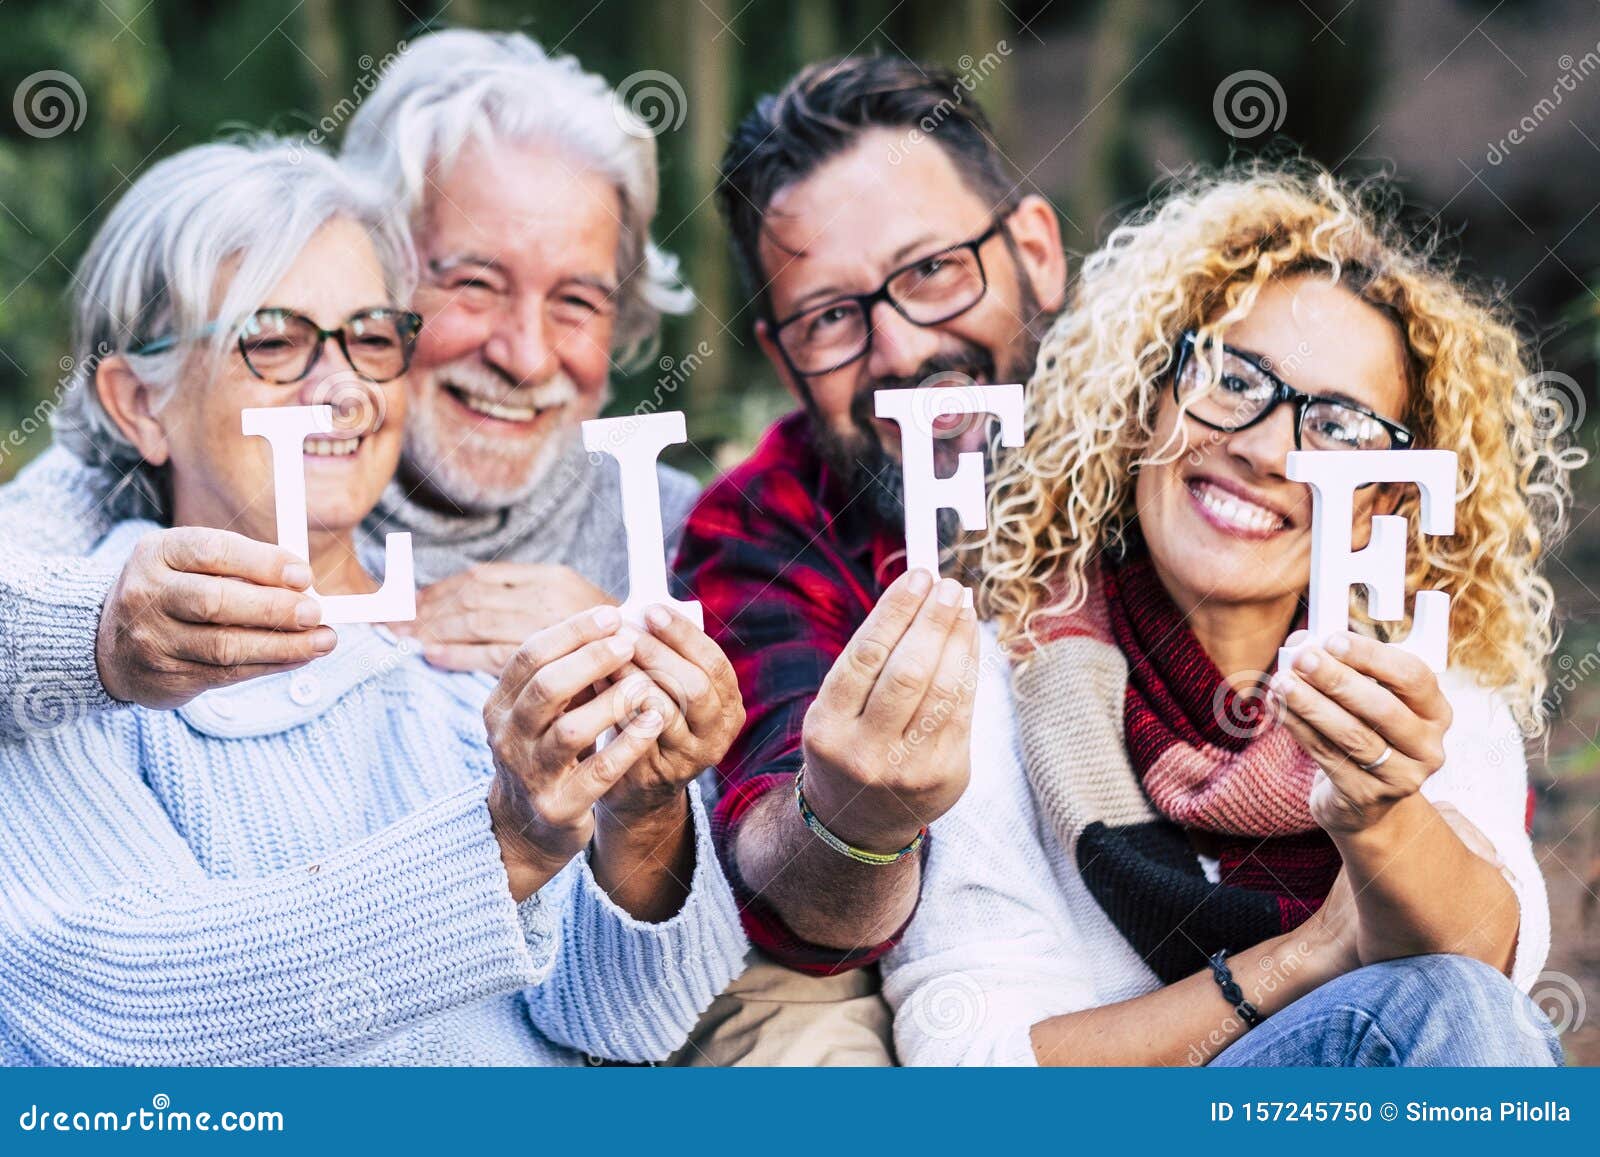 group of mixed ages generations people smiling and showing blocks letters with  life word -  happy lifestye enjoying the outdoor